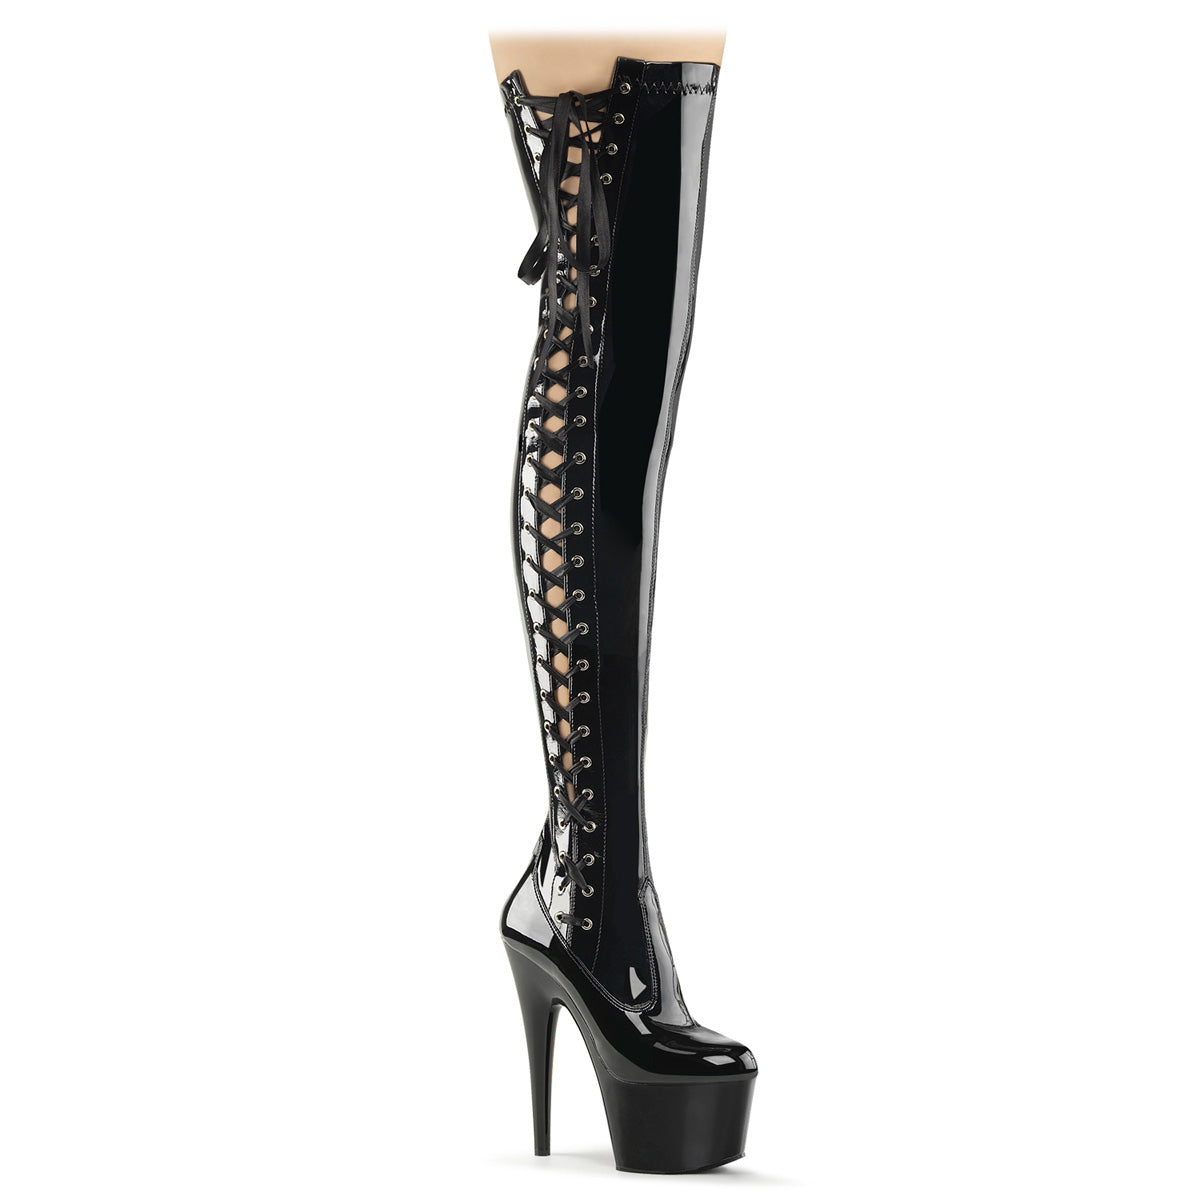 ADORE-3050 Black Thigh High Boots  Multi view 1